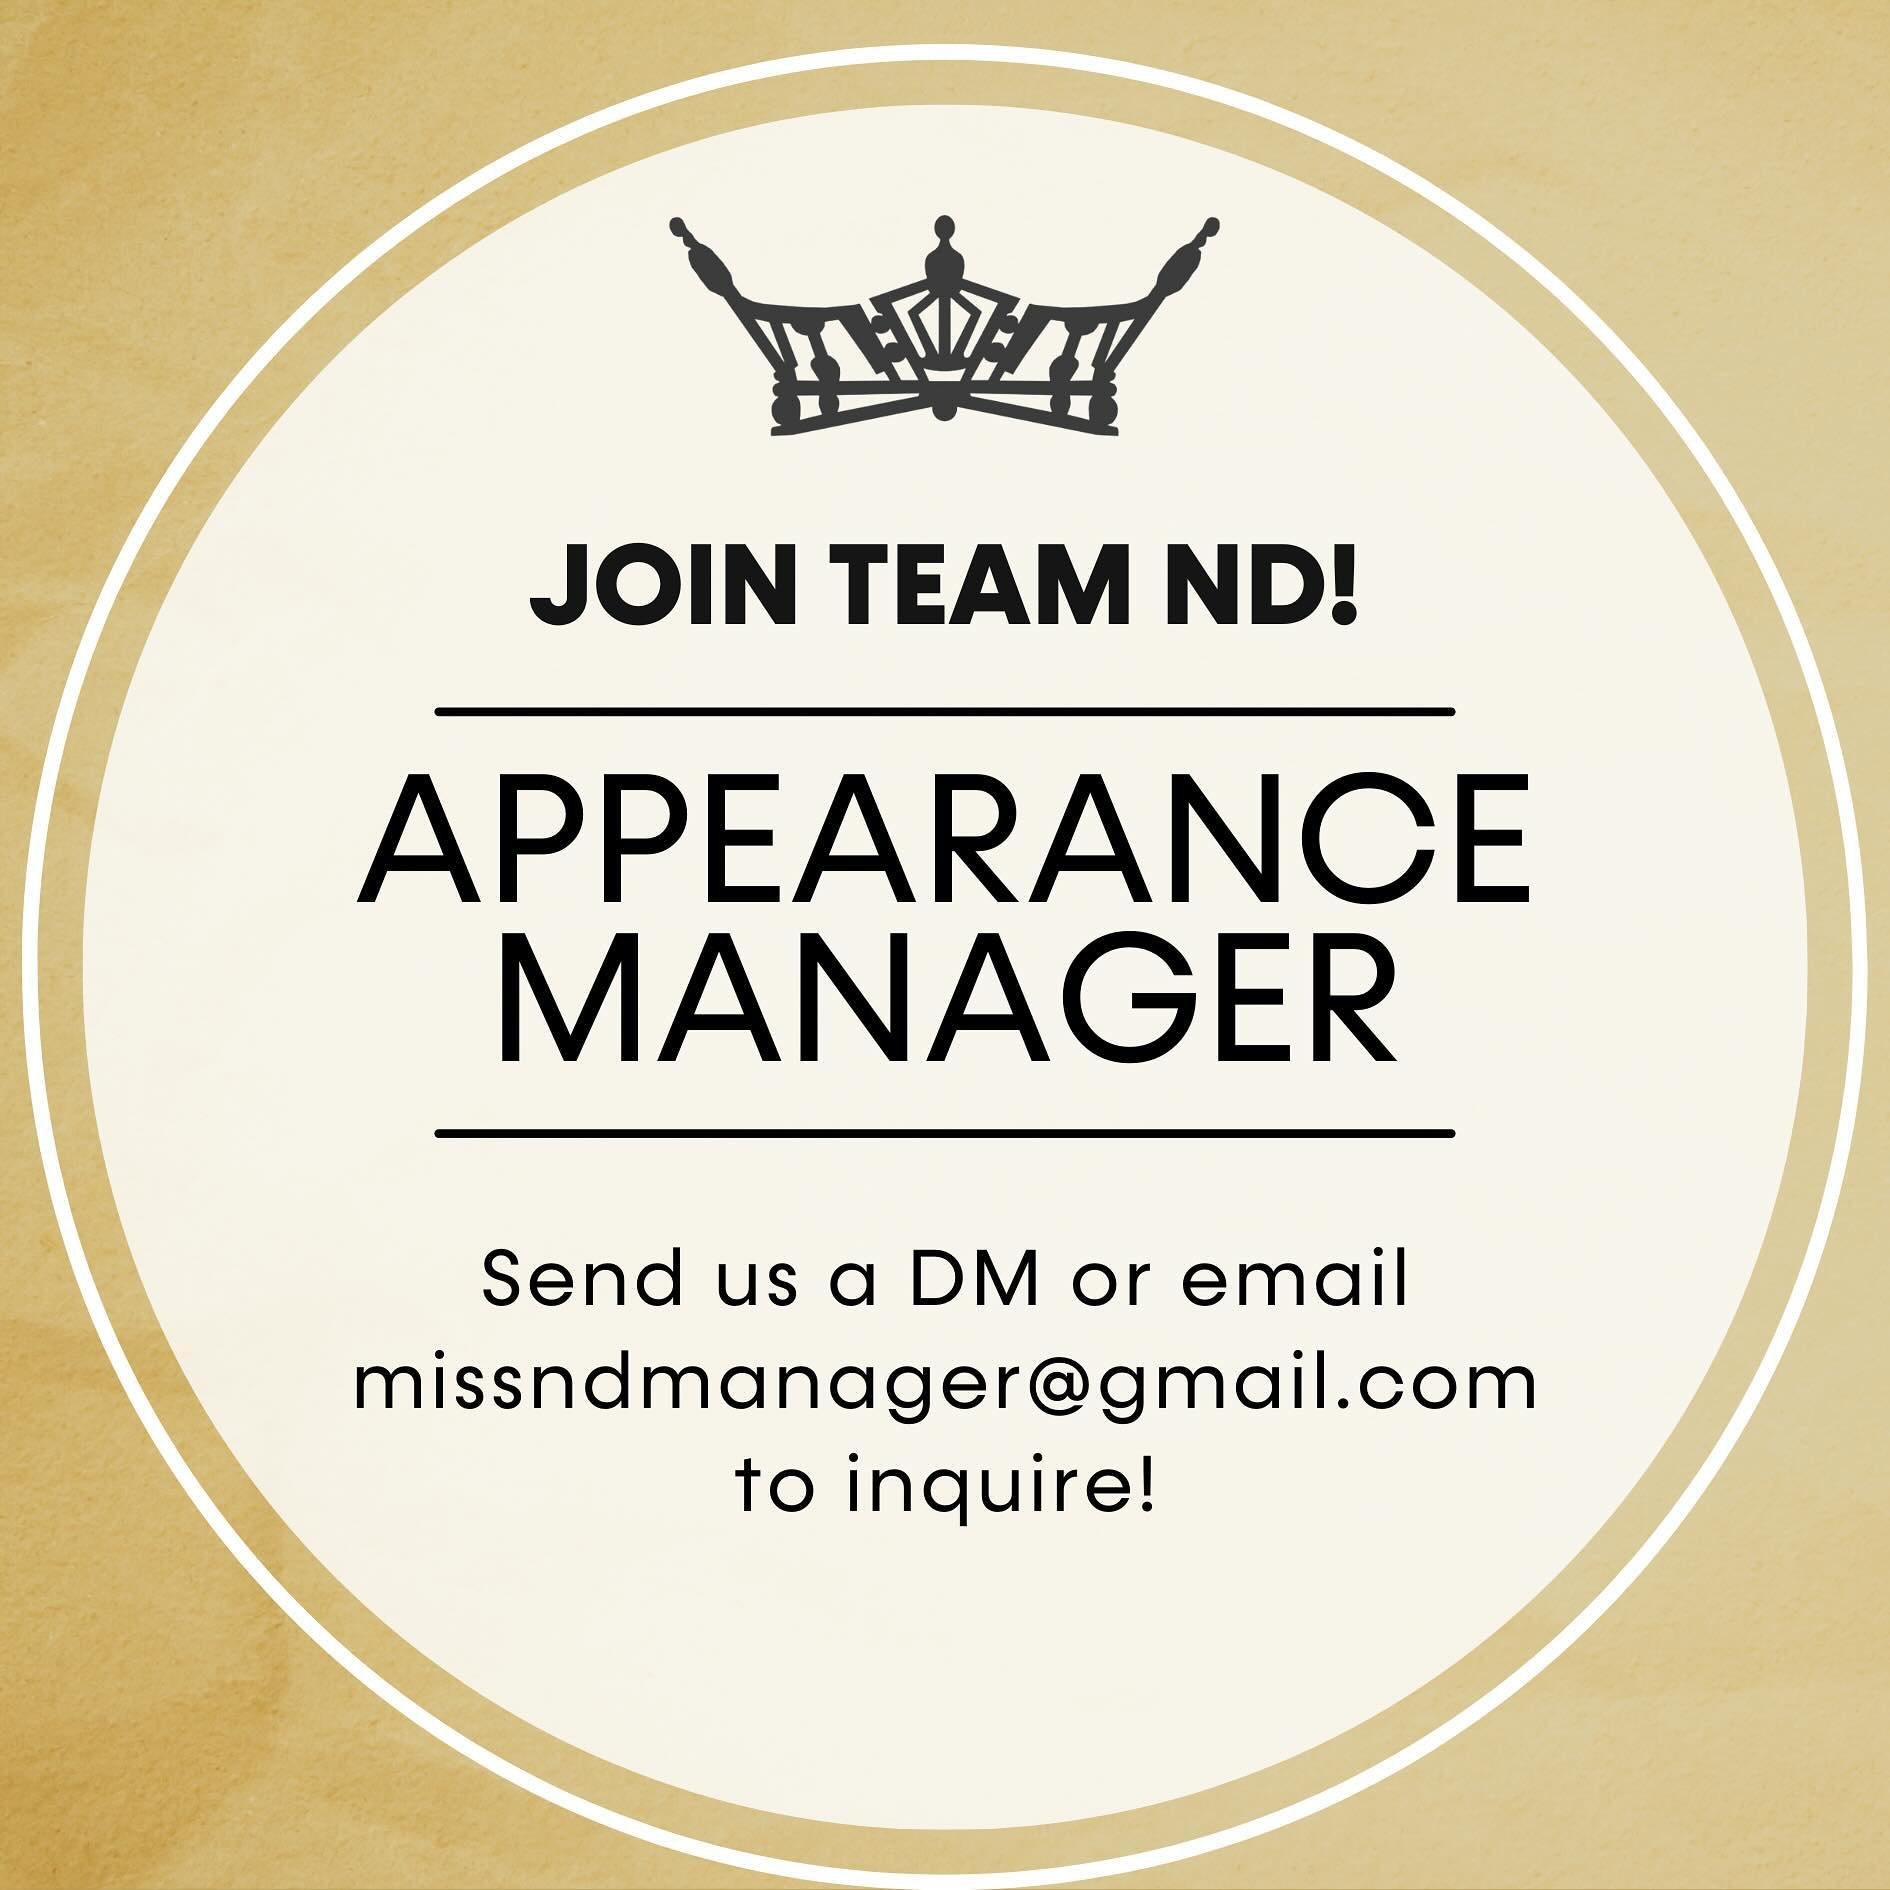 Join our Team! 🌟

We are looking for an Appearance Manager to help our state titleholders coordinate their schedules to attend events, speaking engagements, performances and visit communities across the state. 

This is a volunteer position, and can